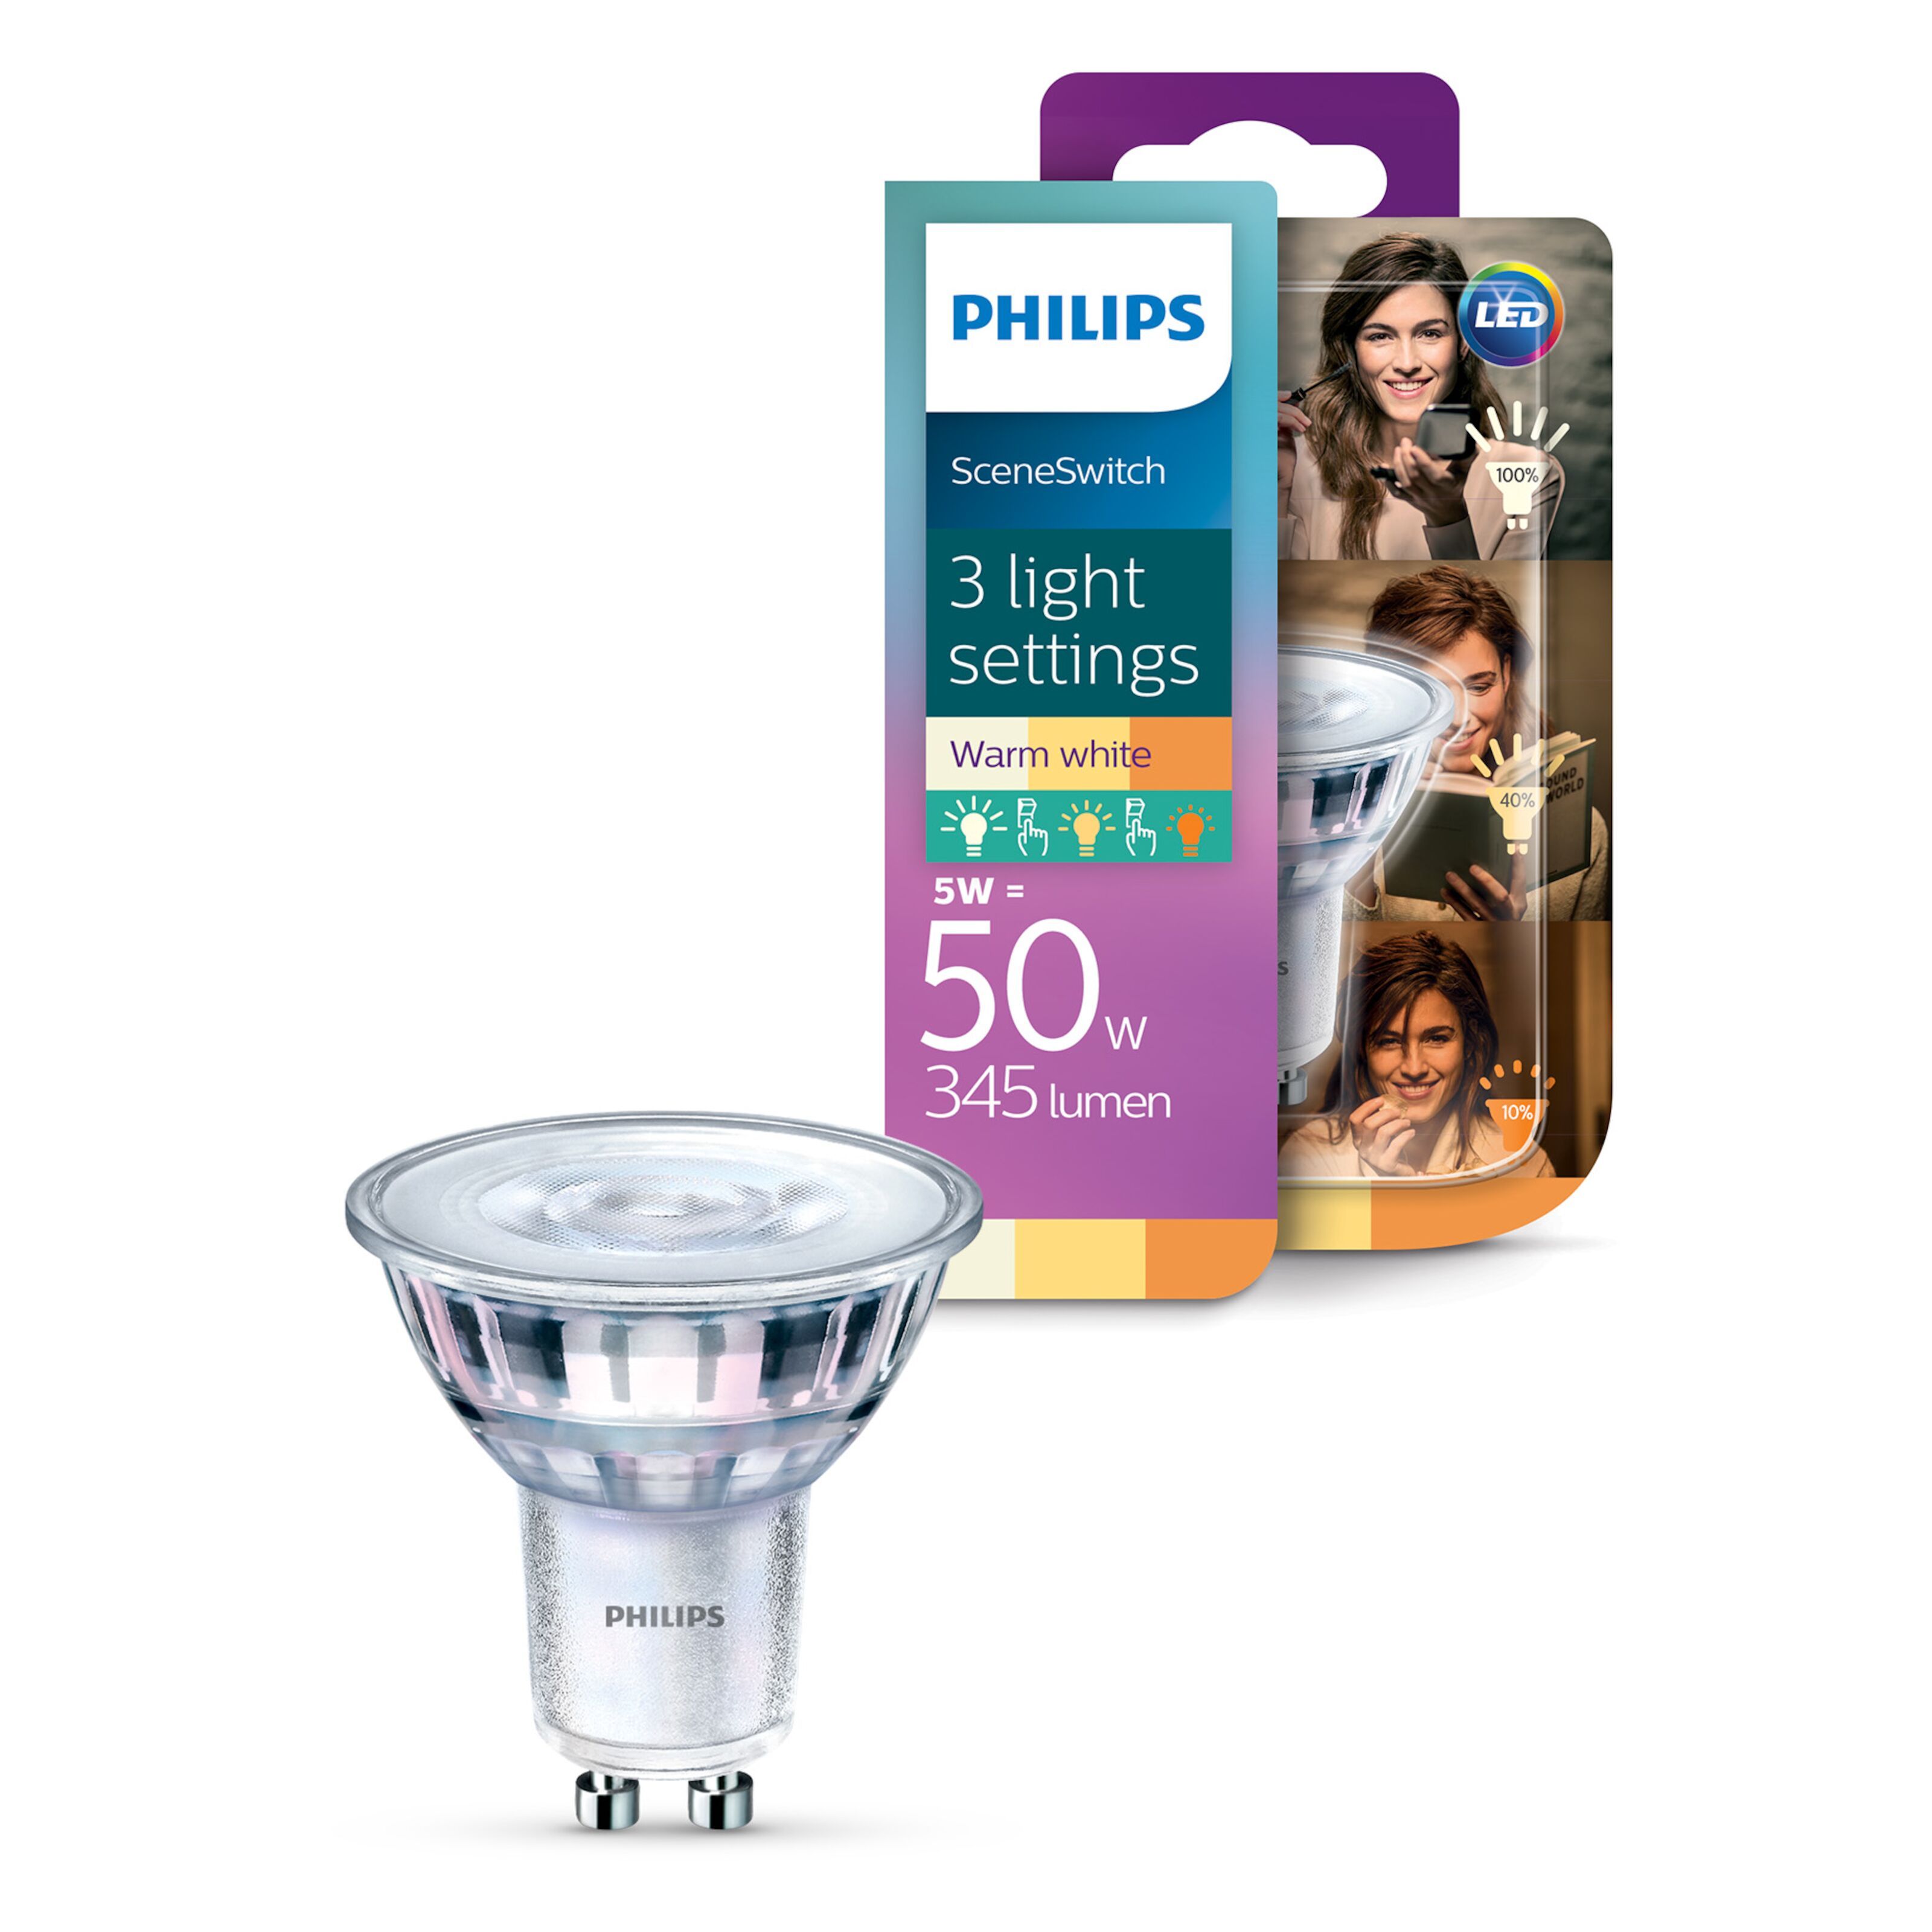 PHILIPS LED SPOTLIGHT GU10 WW 3-PACK 50W 2700K PHILIPS BY SIGNIFY  929003038633